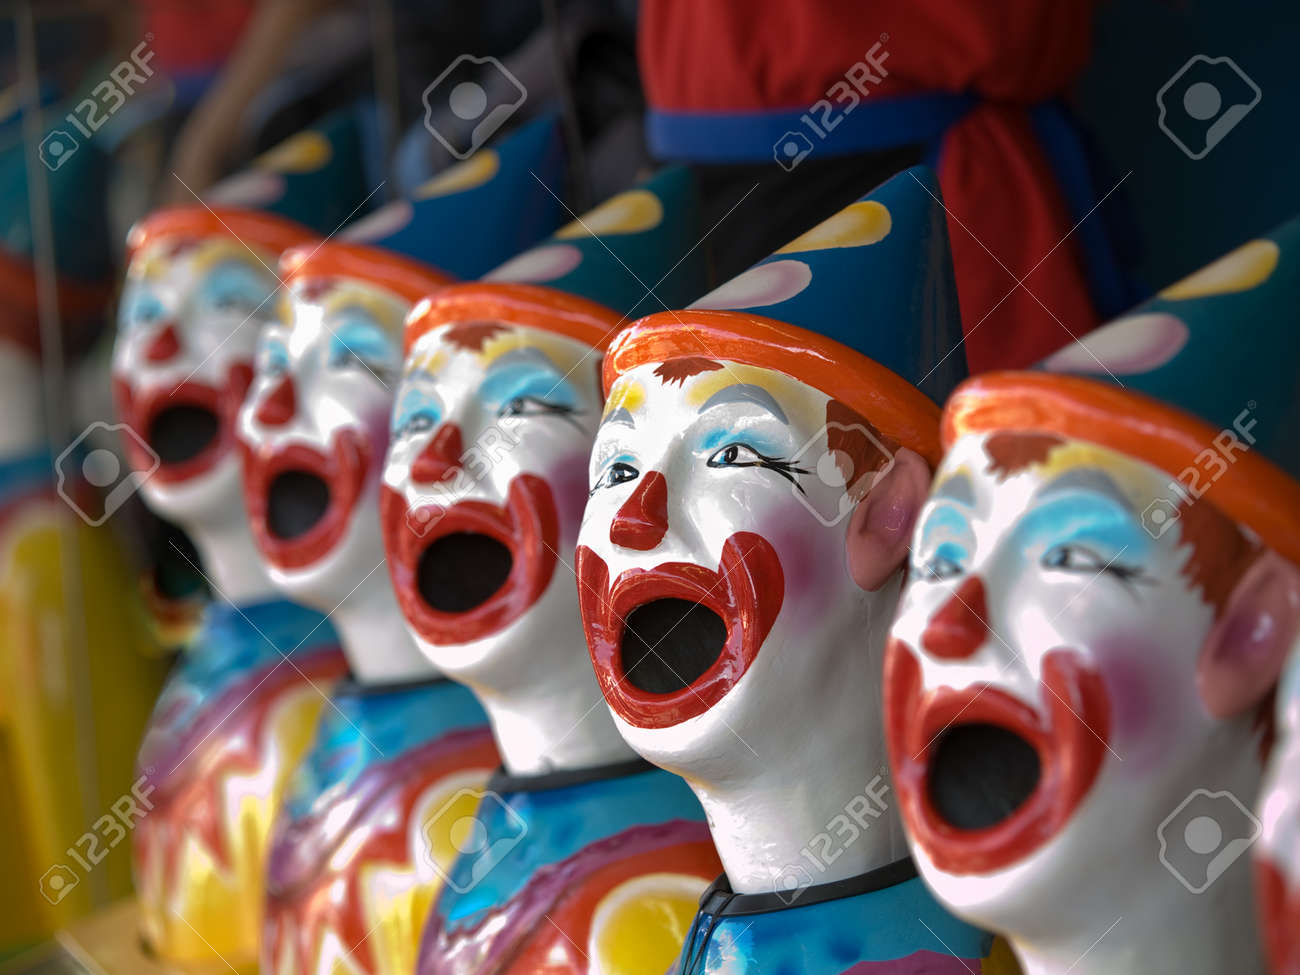 50392009-line-of-ceramic-clown-head-with-open-mouths-at-a-game-at-the-canadian-national-exhibition-toronto-on.jpg